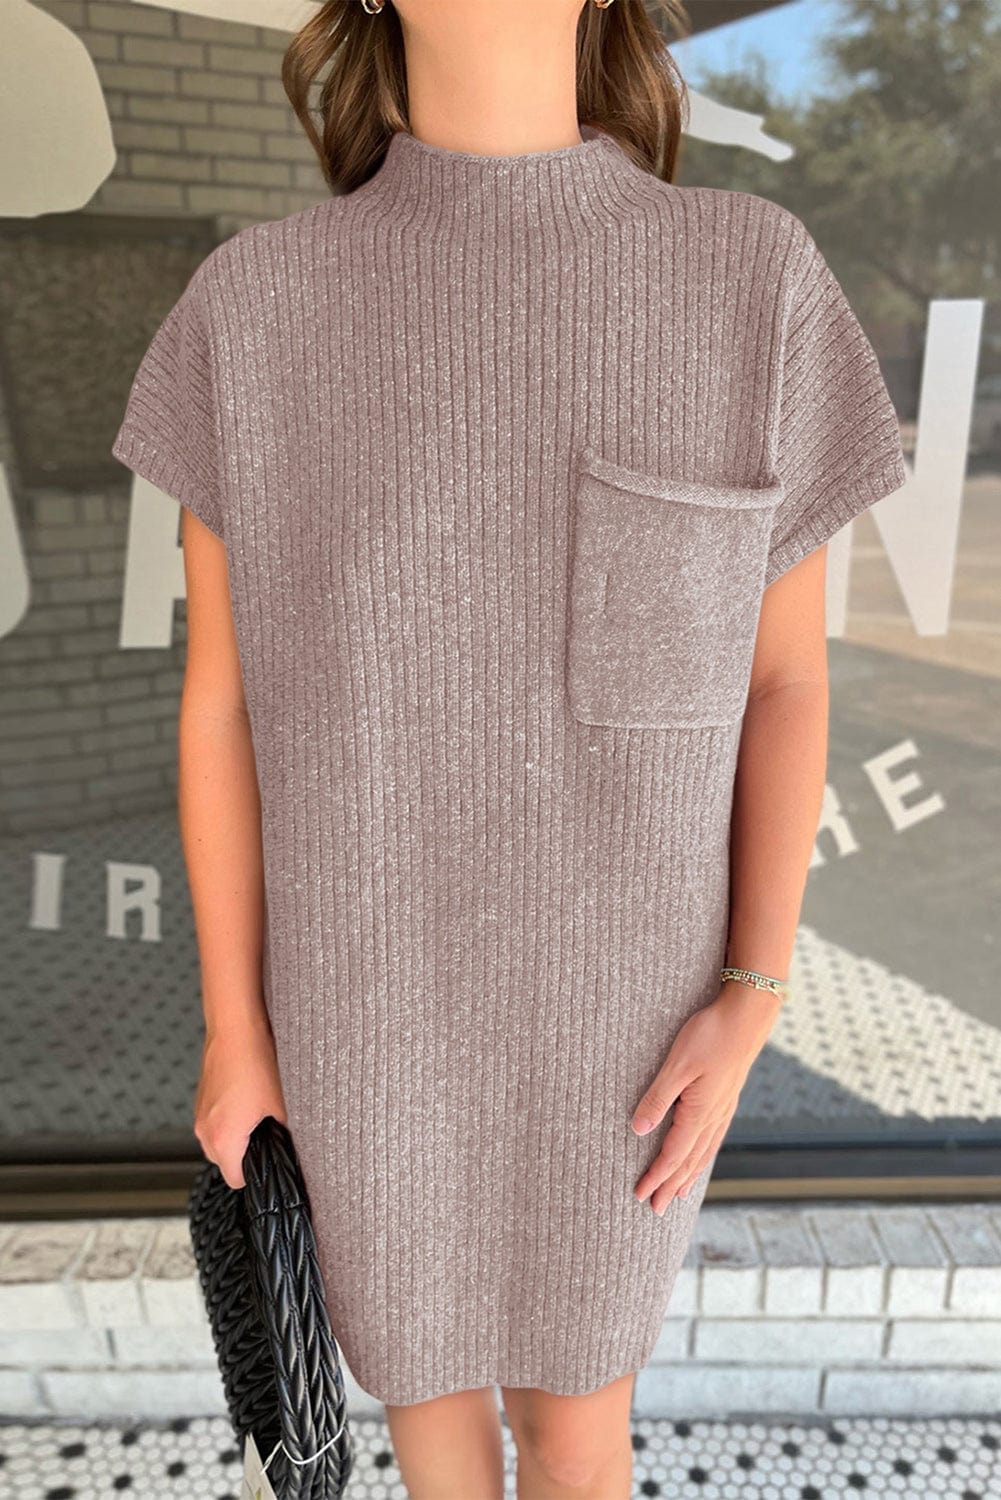 Shoppe EZR Dresses Simply Taupe Patch Pocket Ribbed Knit Short Sleeve Sweater Dress